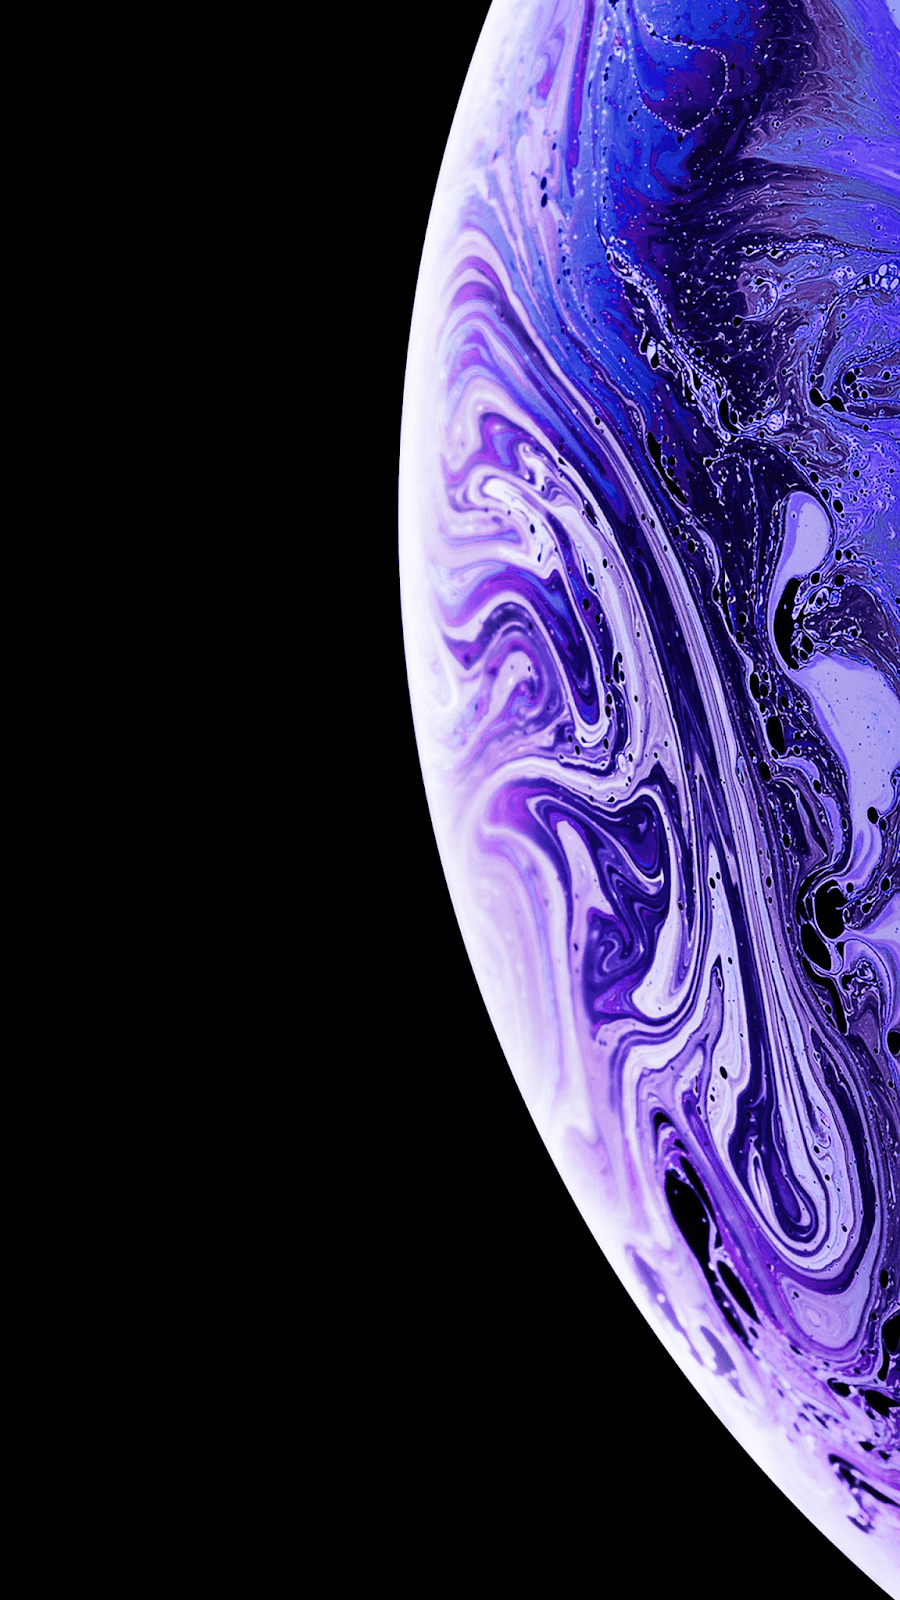 iPhone XS Planet Wallpaper Free iPhone XS Planet